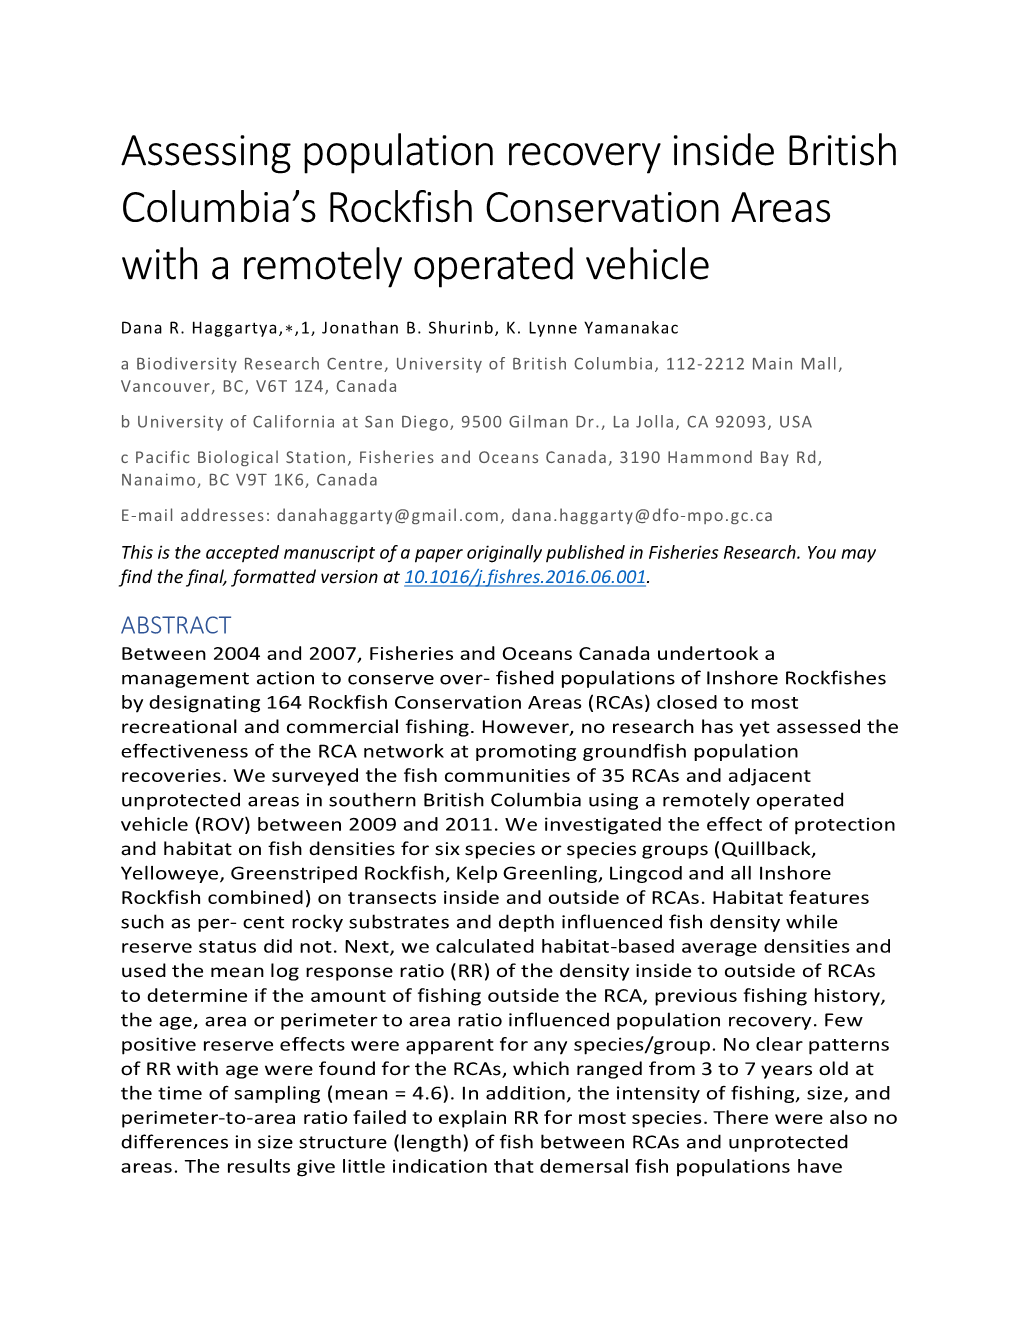 Assessing Population Recovery Inside British Columbia's Rockfish